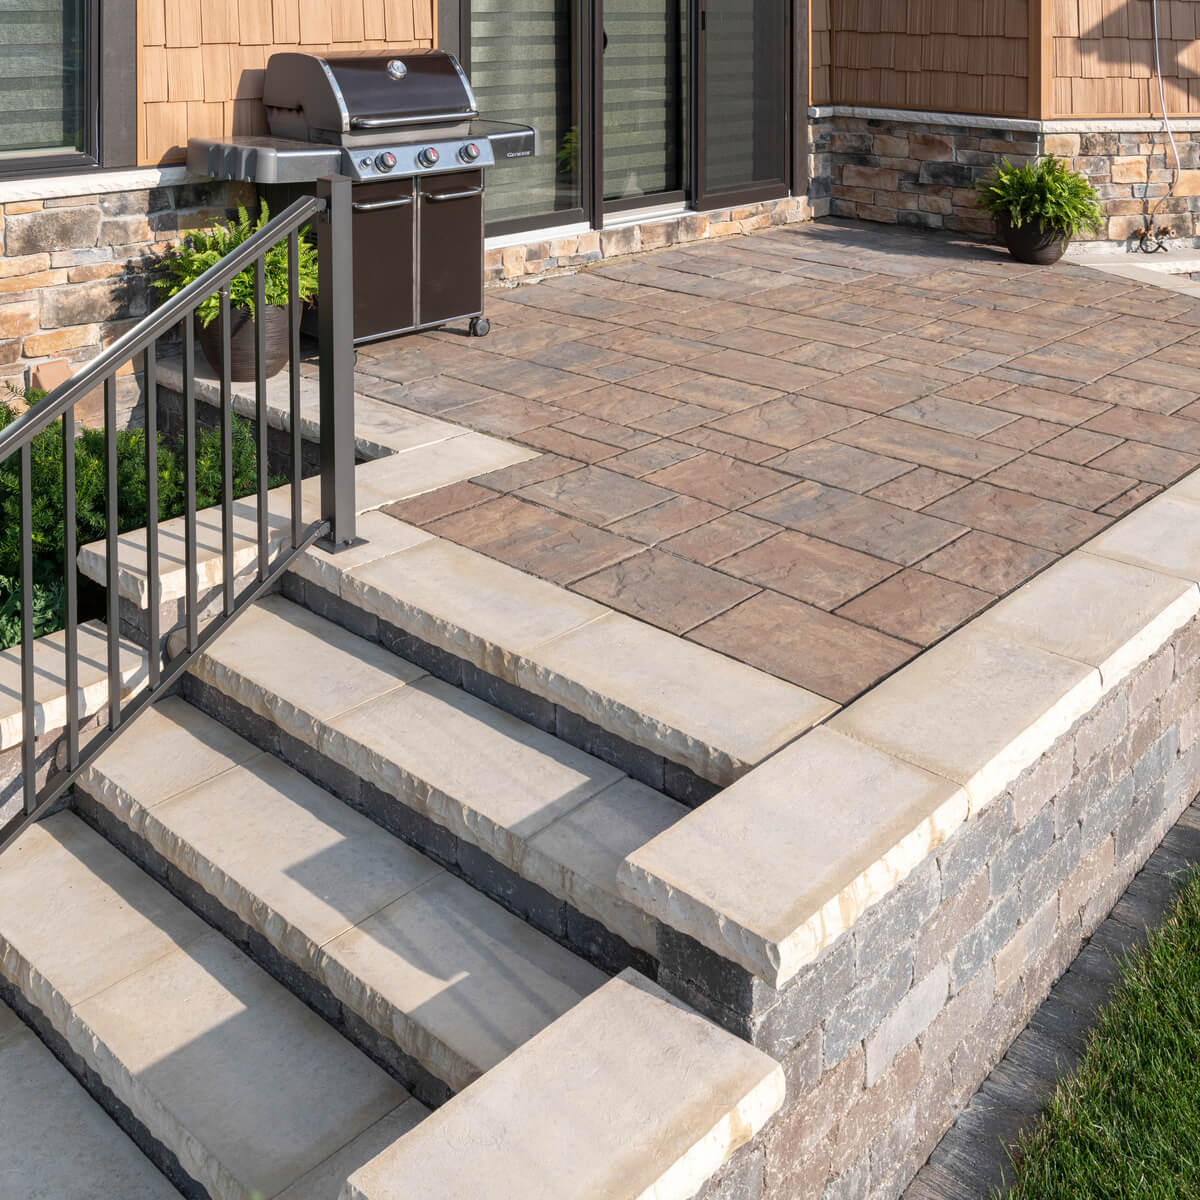 Raised Patio with Retaining Wall and Steps Down to Lower Area